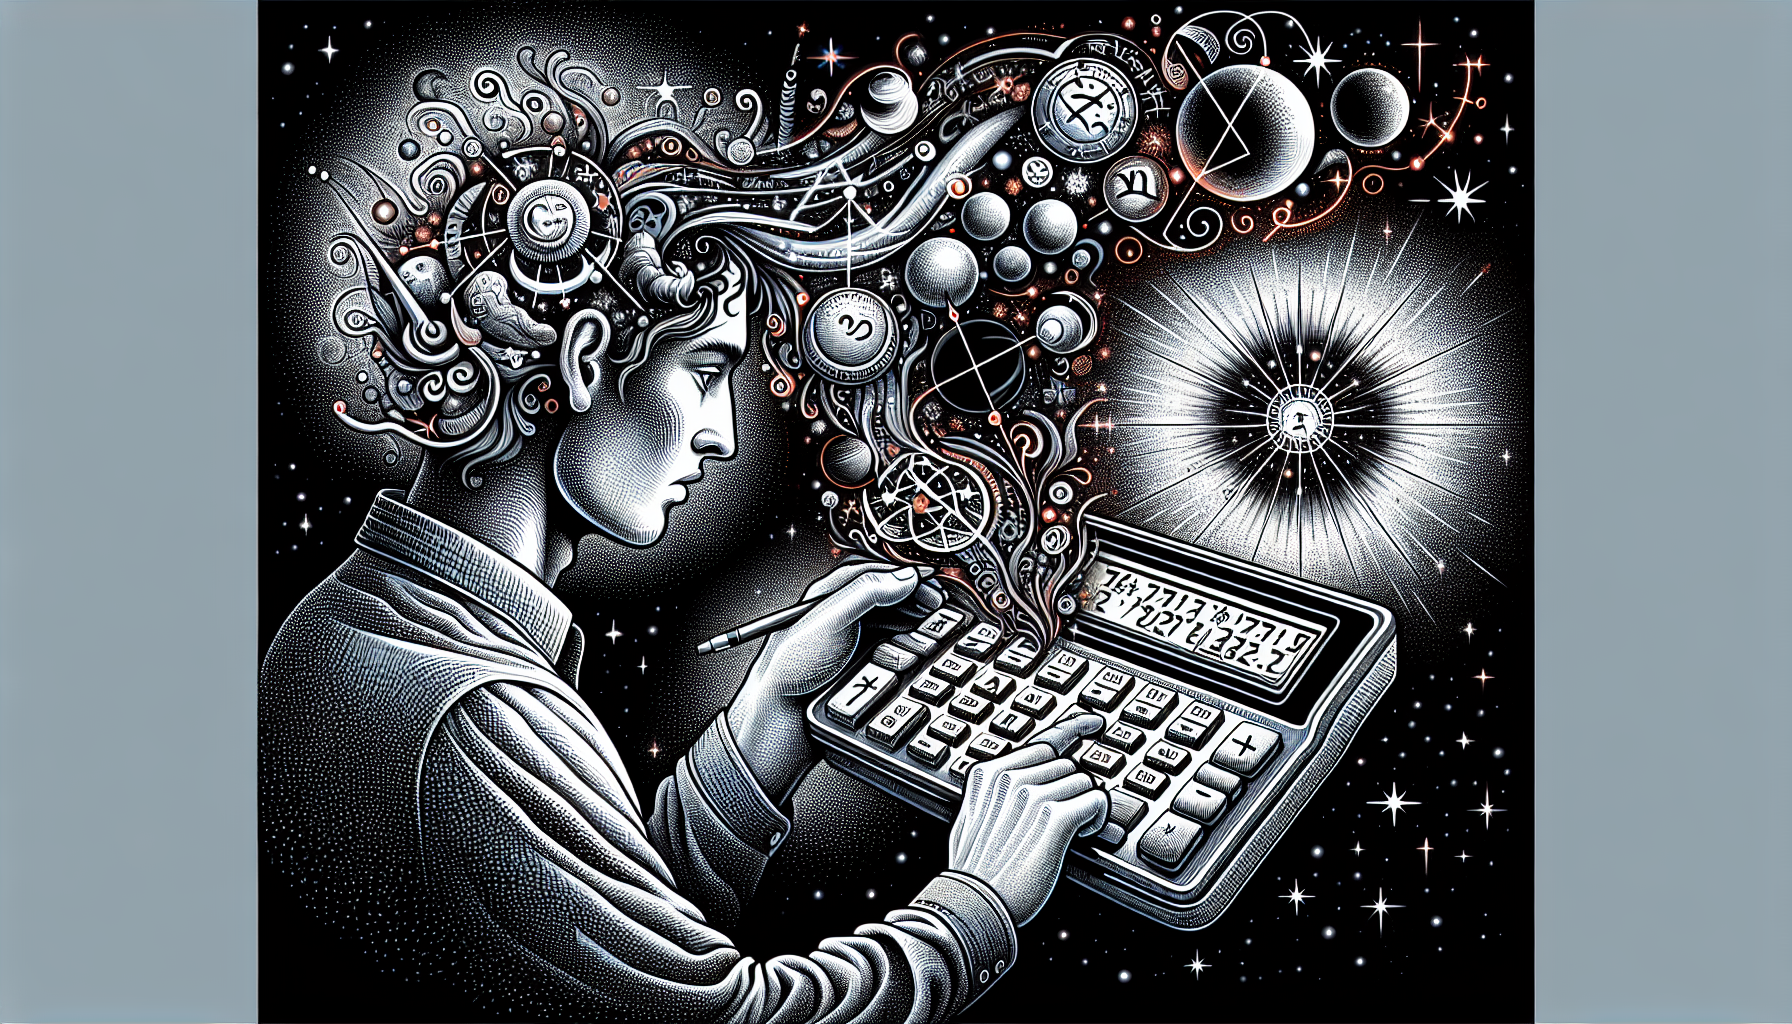 Illustration of a person using a calculator with planetary symbols